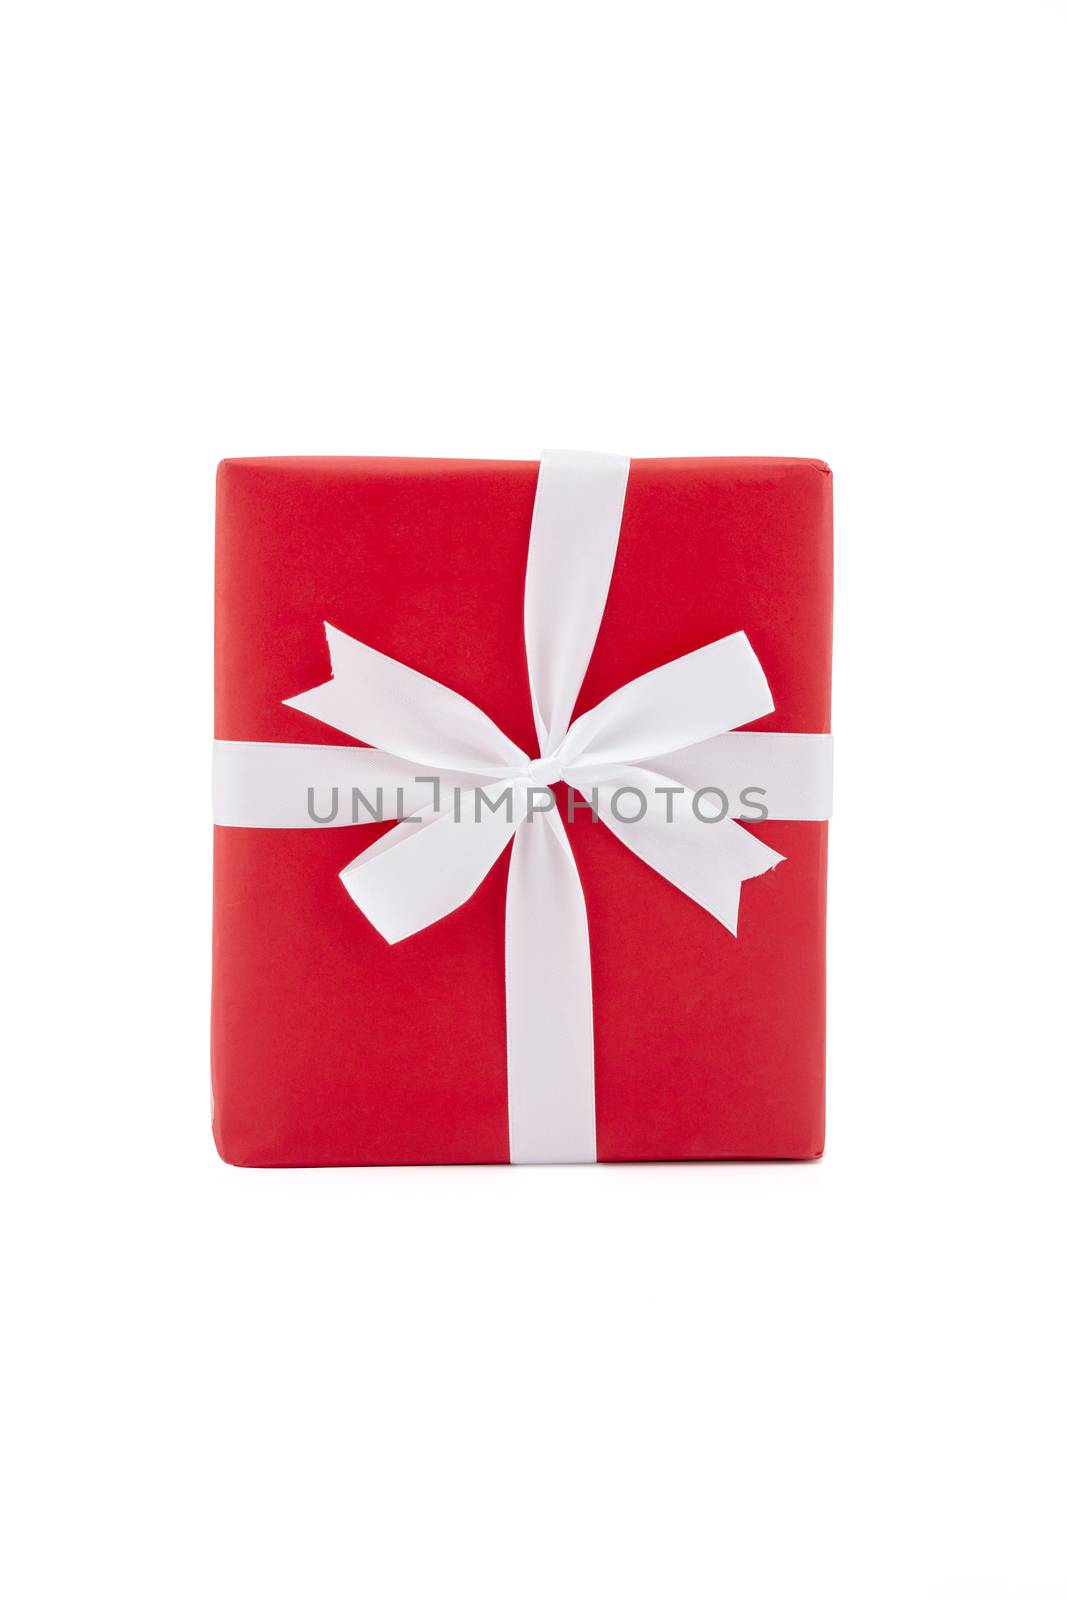 Red gift box and white ribbon in season Christmas and new year i by nnudoo